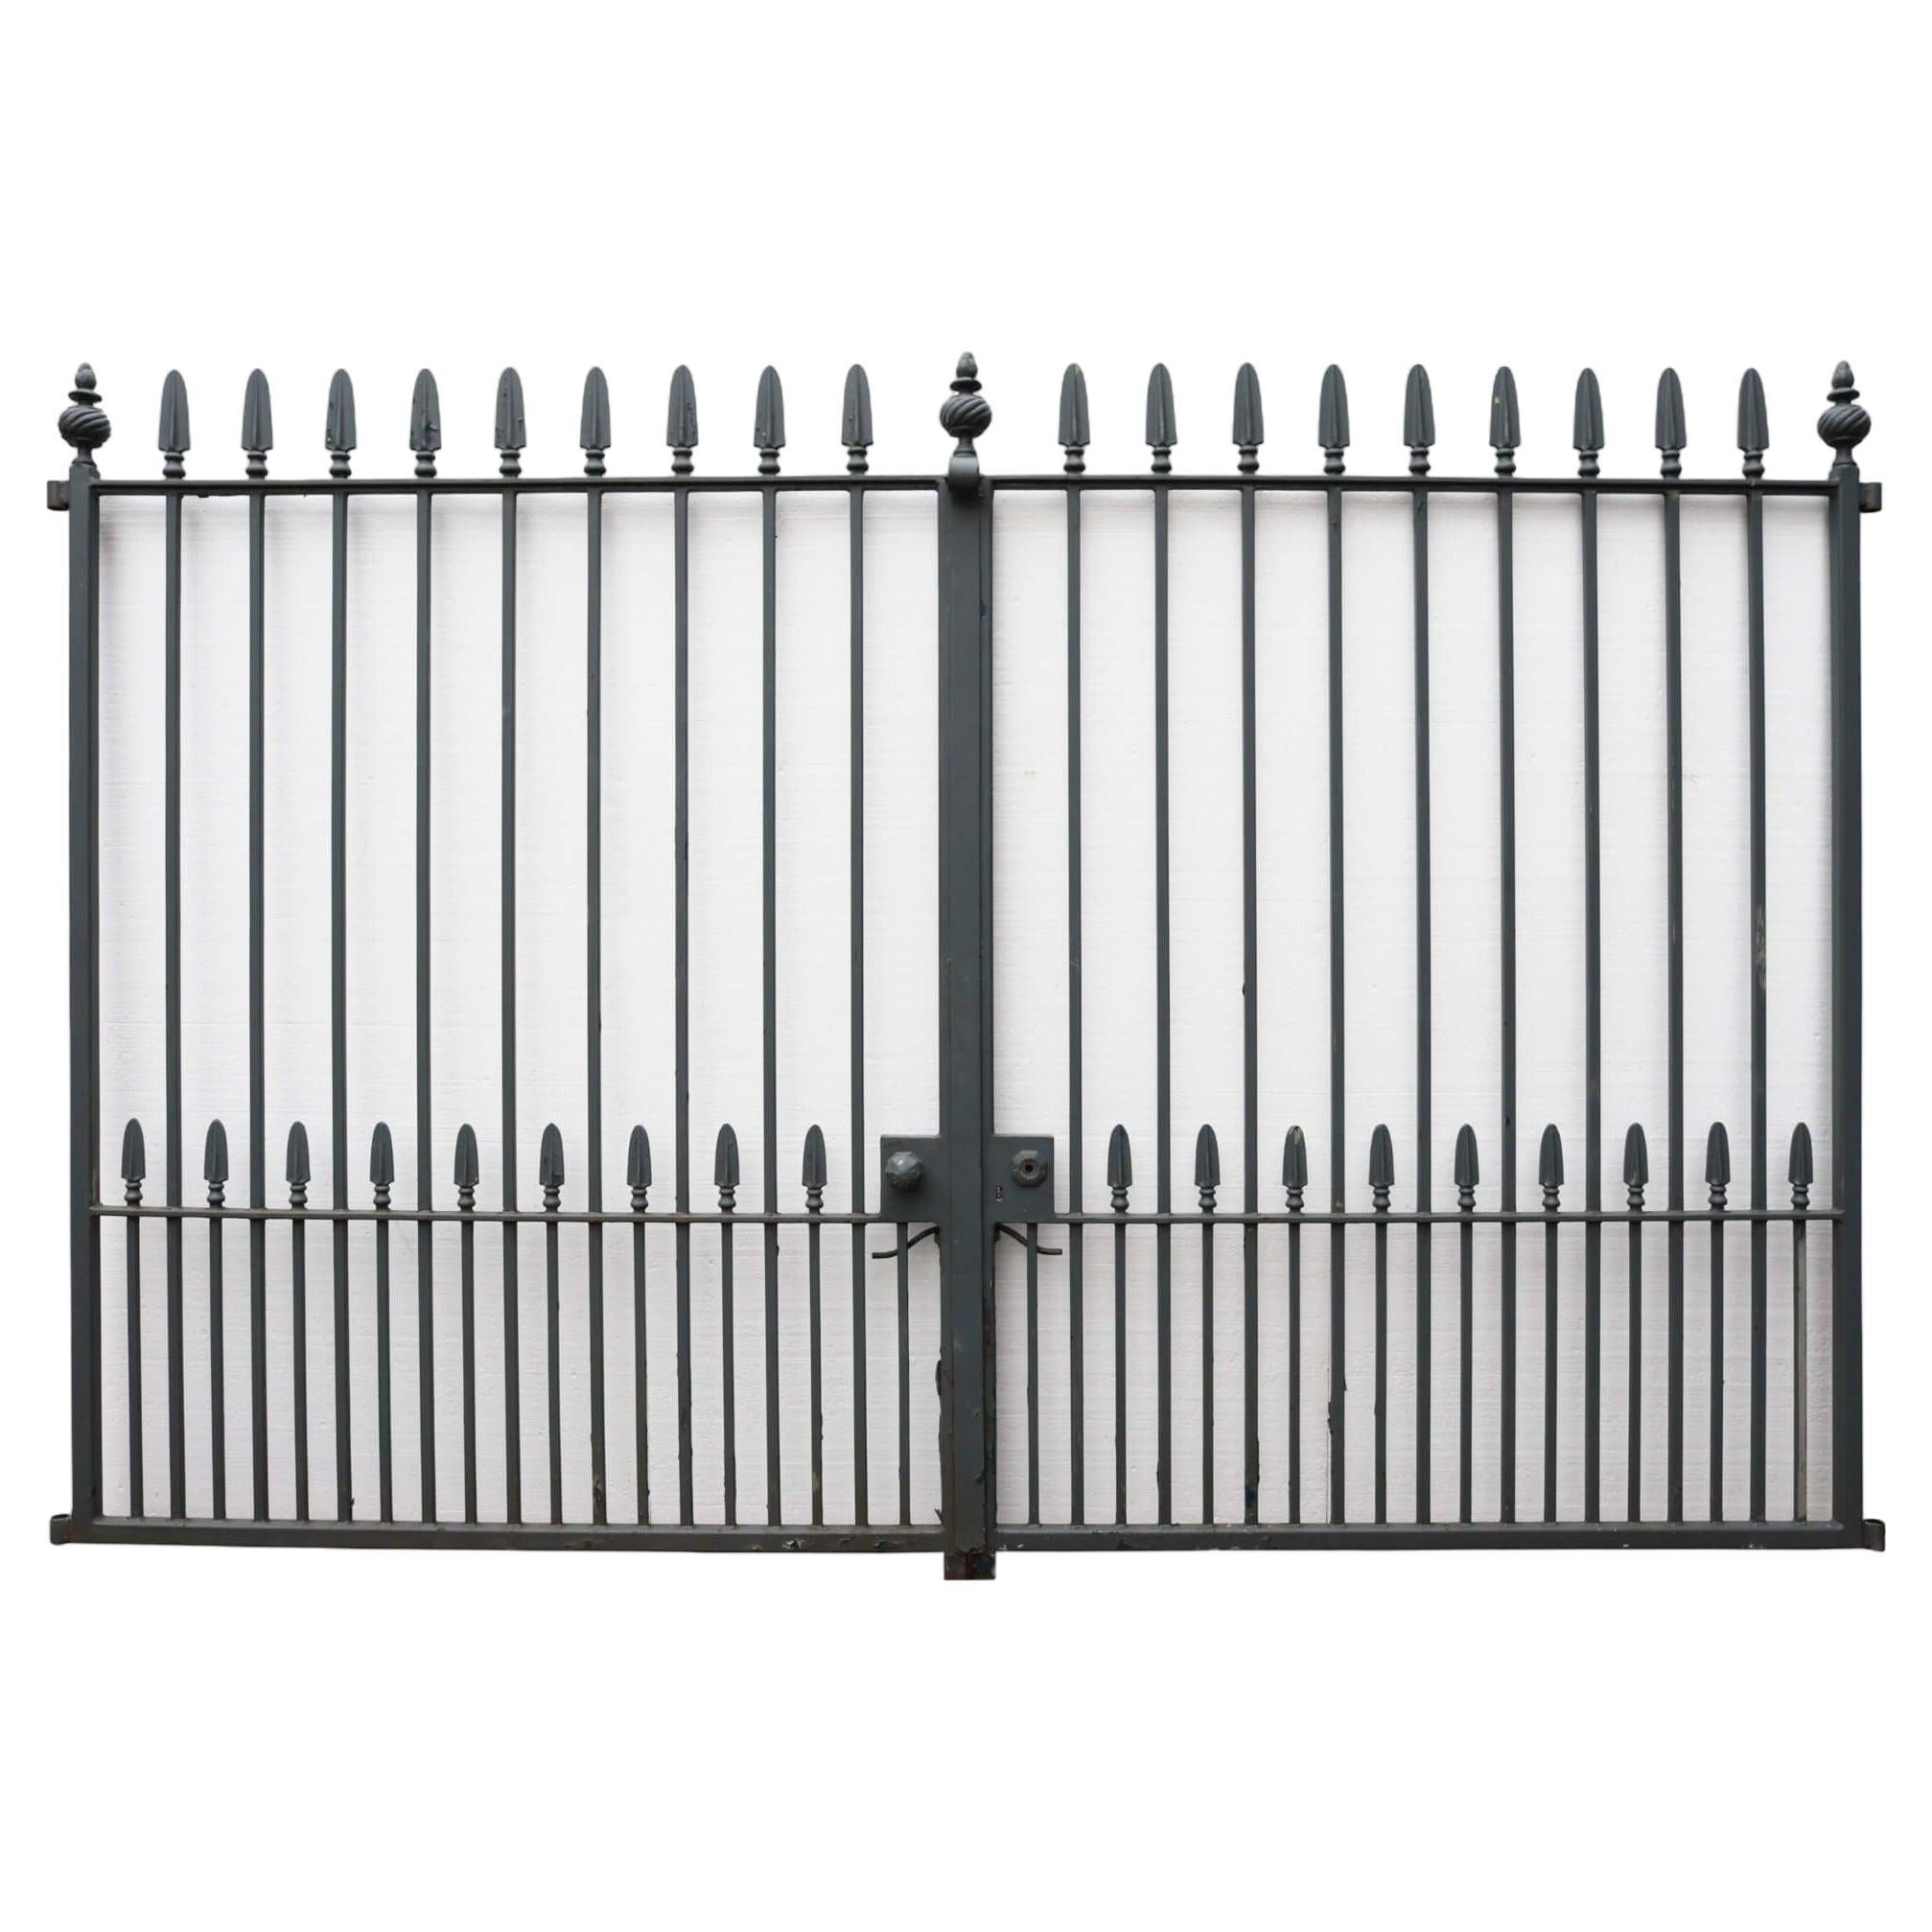 Set of Reclaimed Steel Driveway Gates 313 cm (10’3”) For Sale